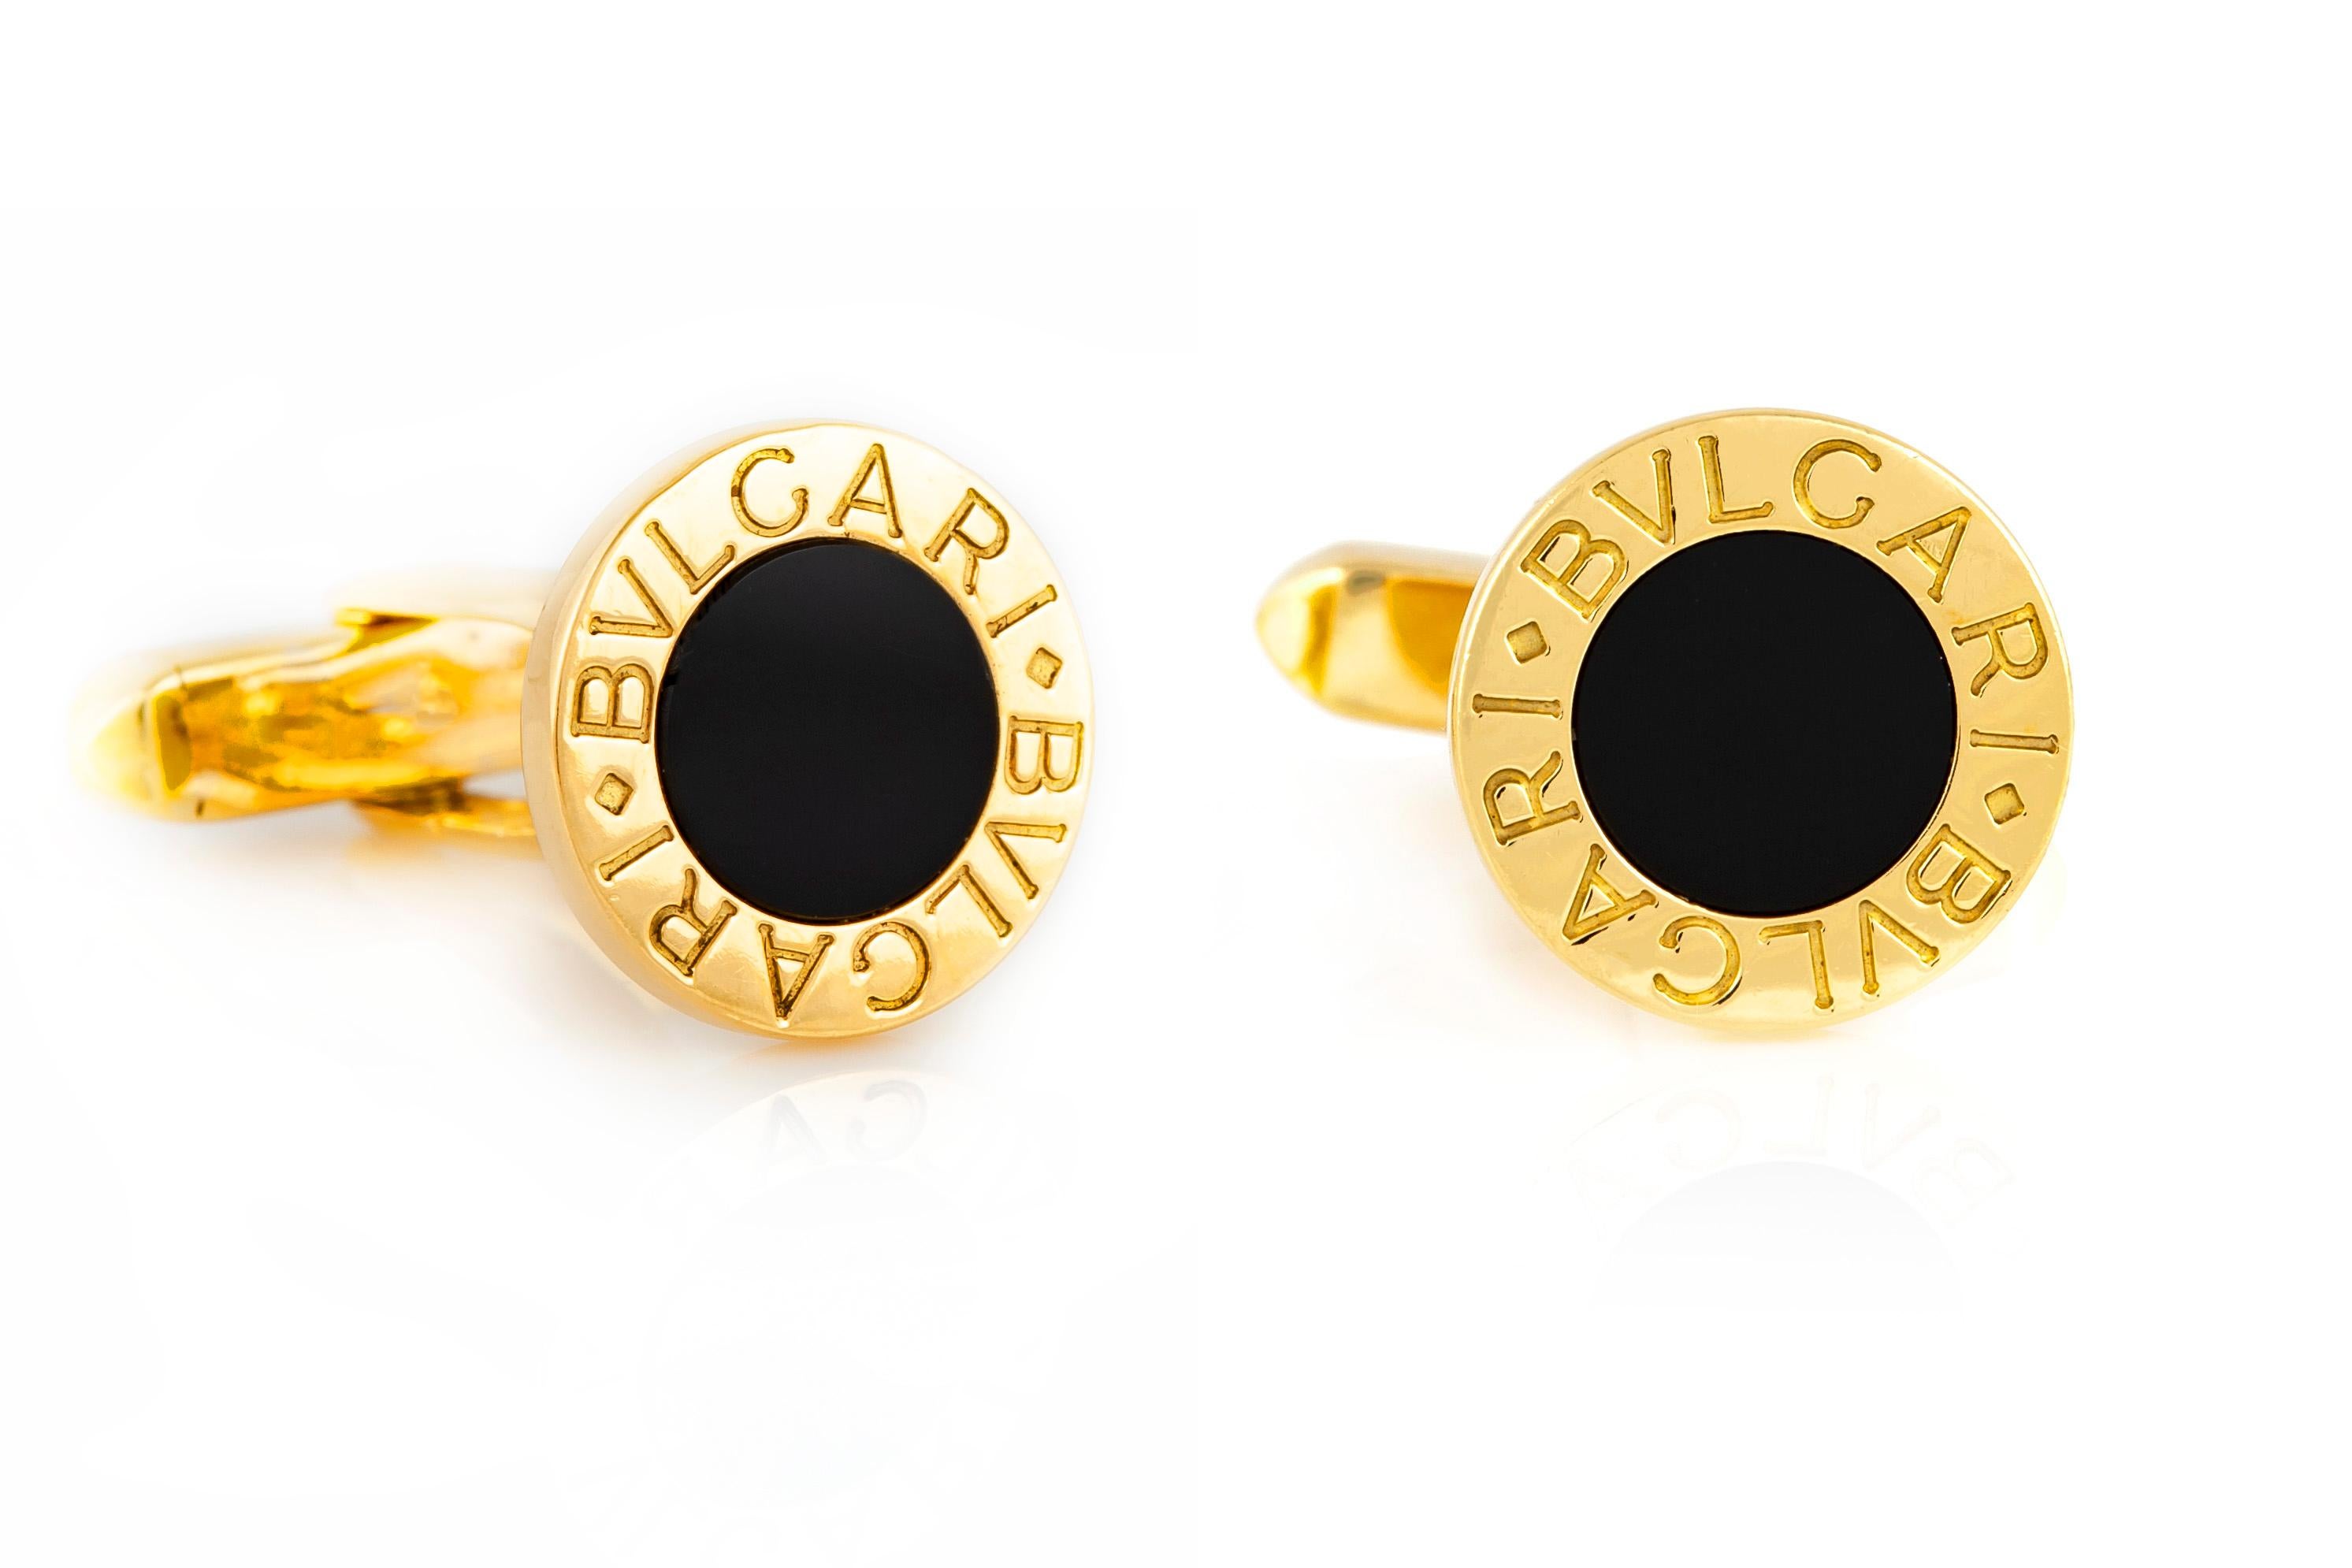 Original Bvlgari cufflinks finely crafted in 18k yellow gold with Black Onyx at the center. 